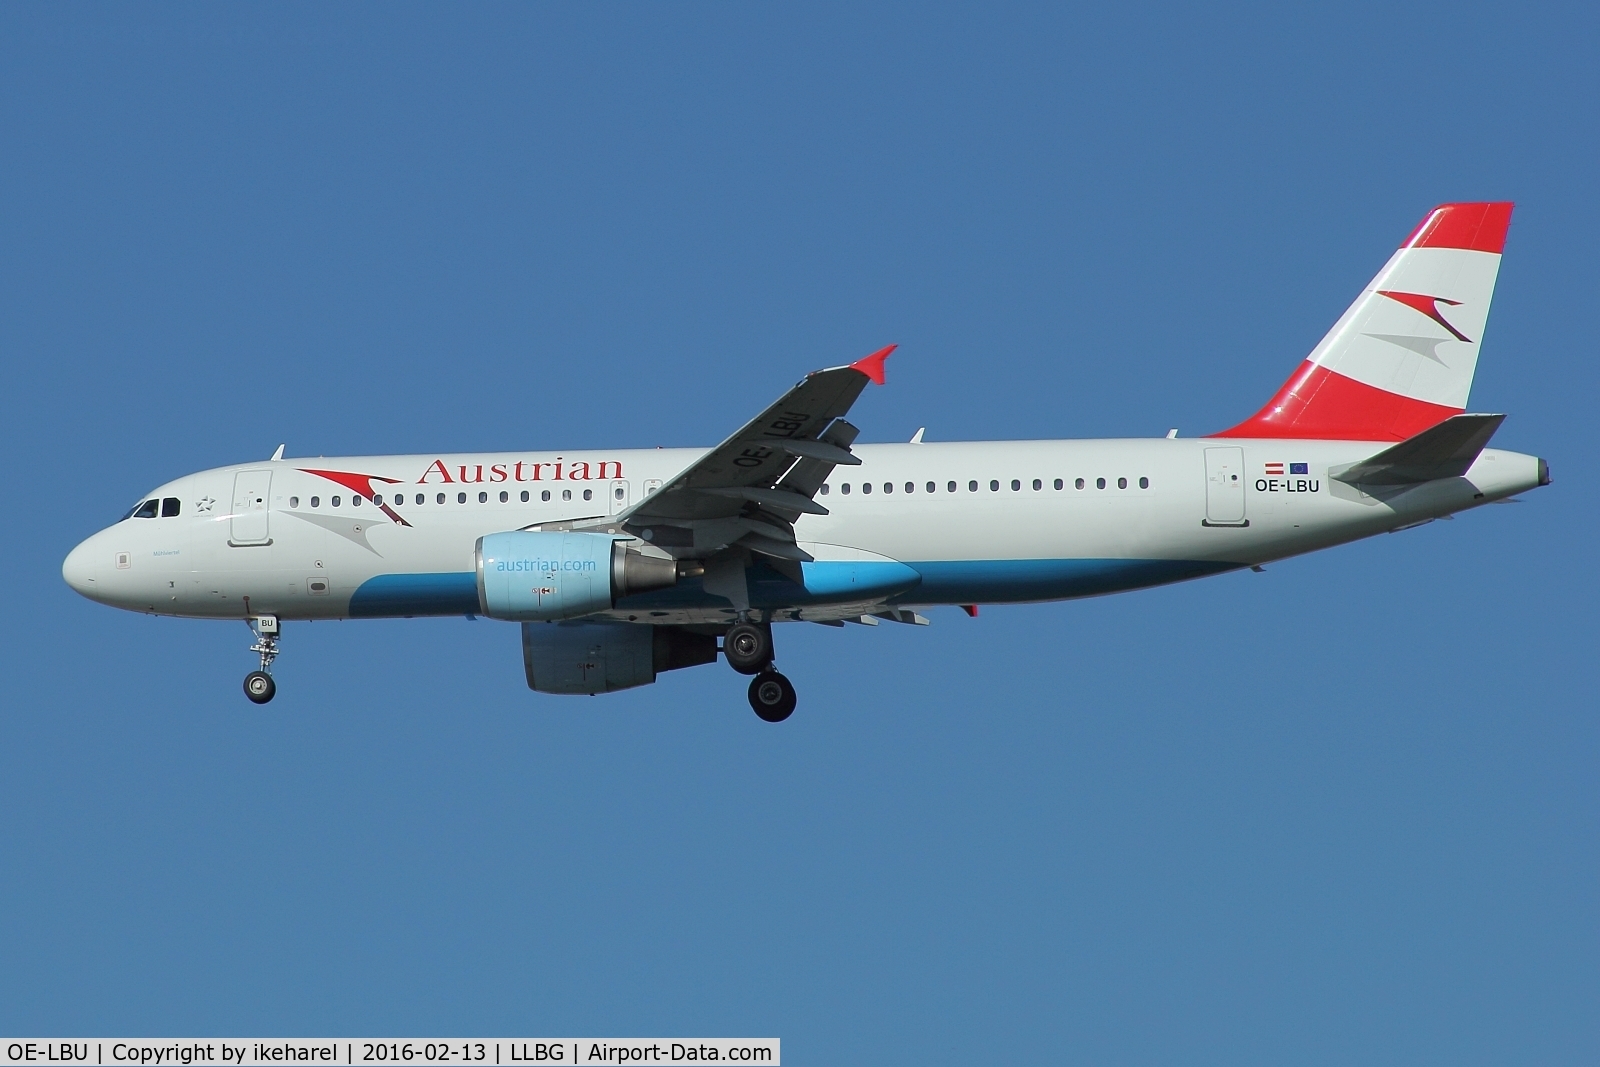 OE-LBU, 2001 Airbus A320-214 C/N 1478, Flight from Vienna on final approach to runway 30.